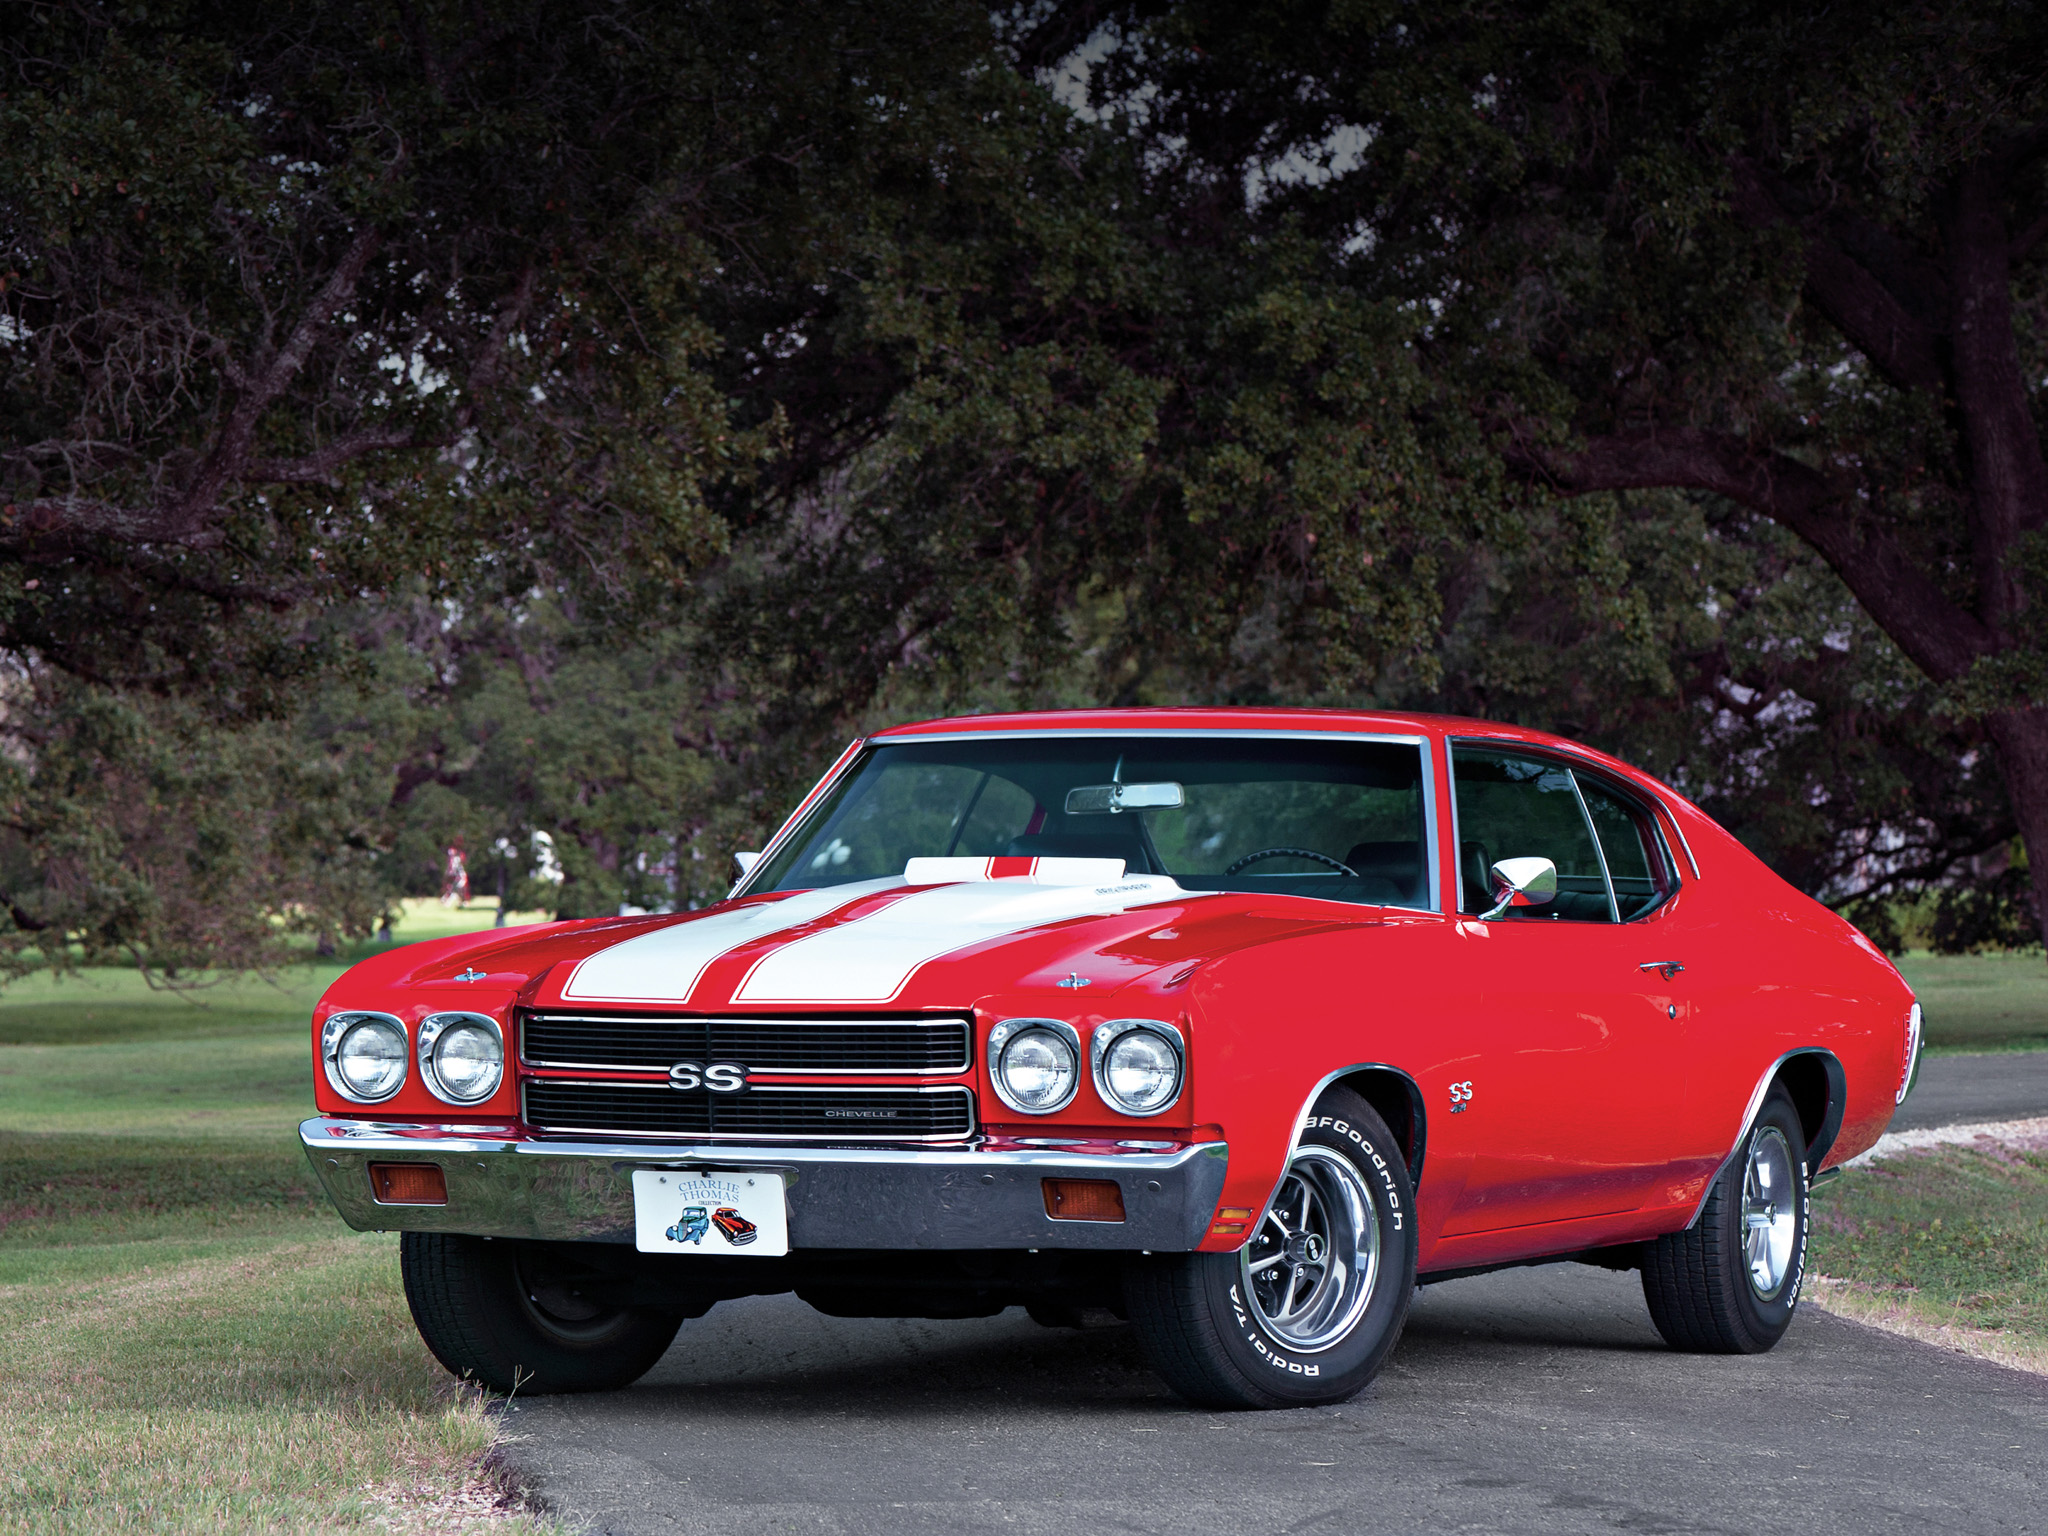 1970 Chevrolet Chevelle SS 454 LS6 Hardtop Coupe muscle classic s s r